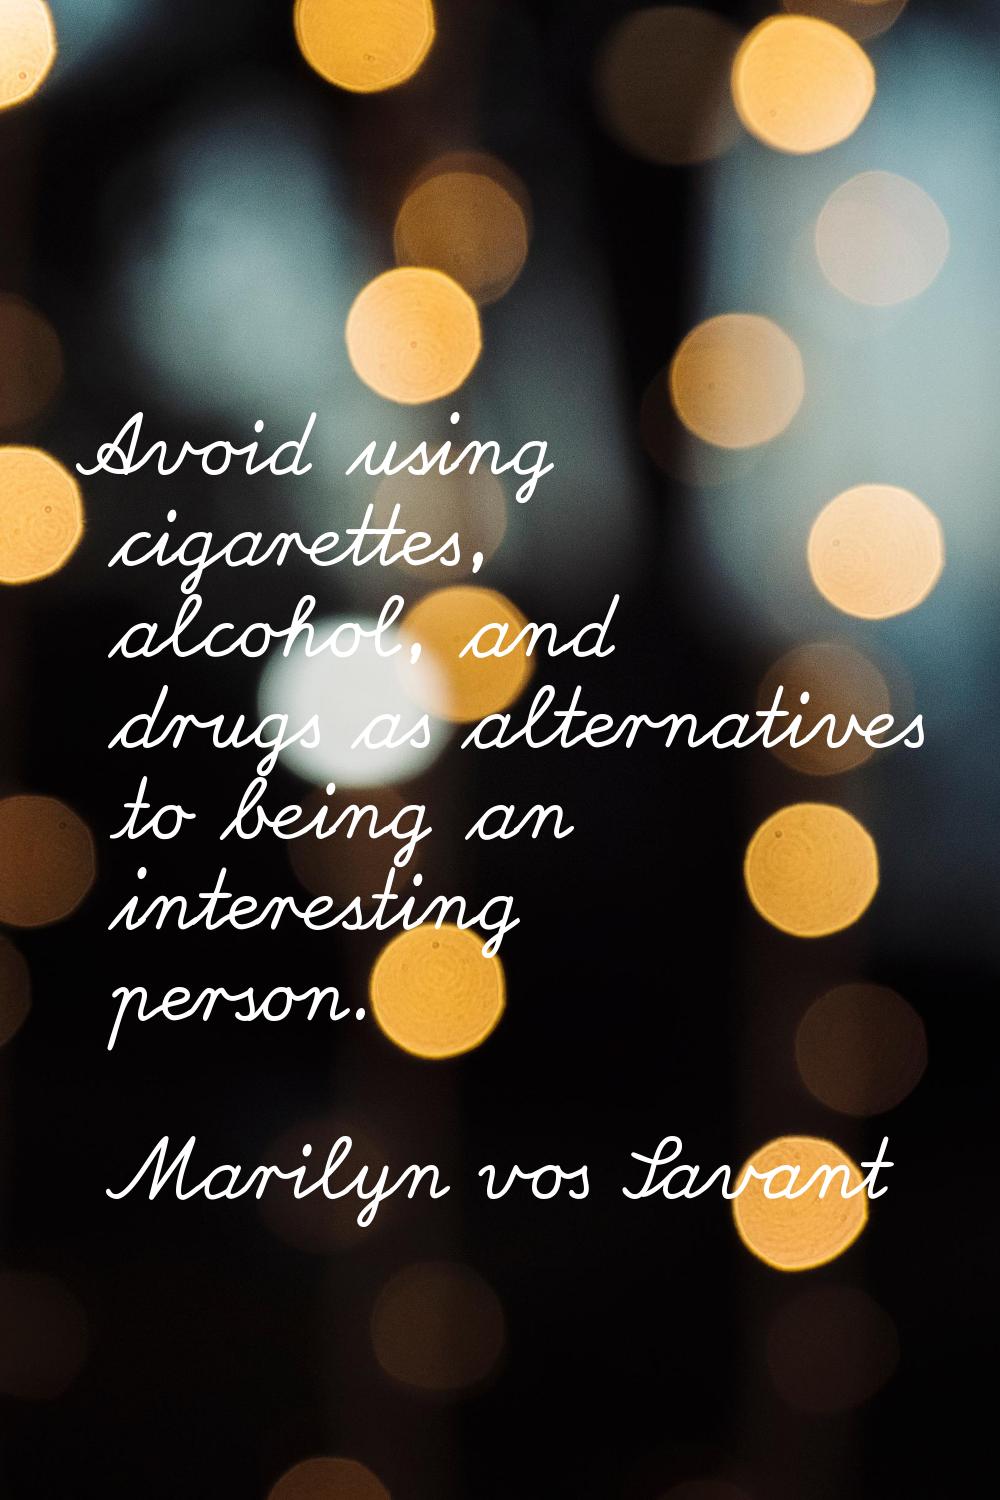 Avoid using cigarettes, alcohol, and drugs as alternatives to being an interesting person.